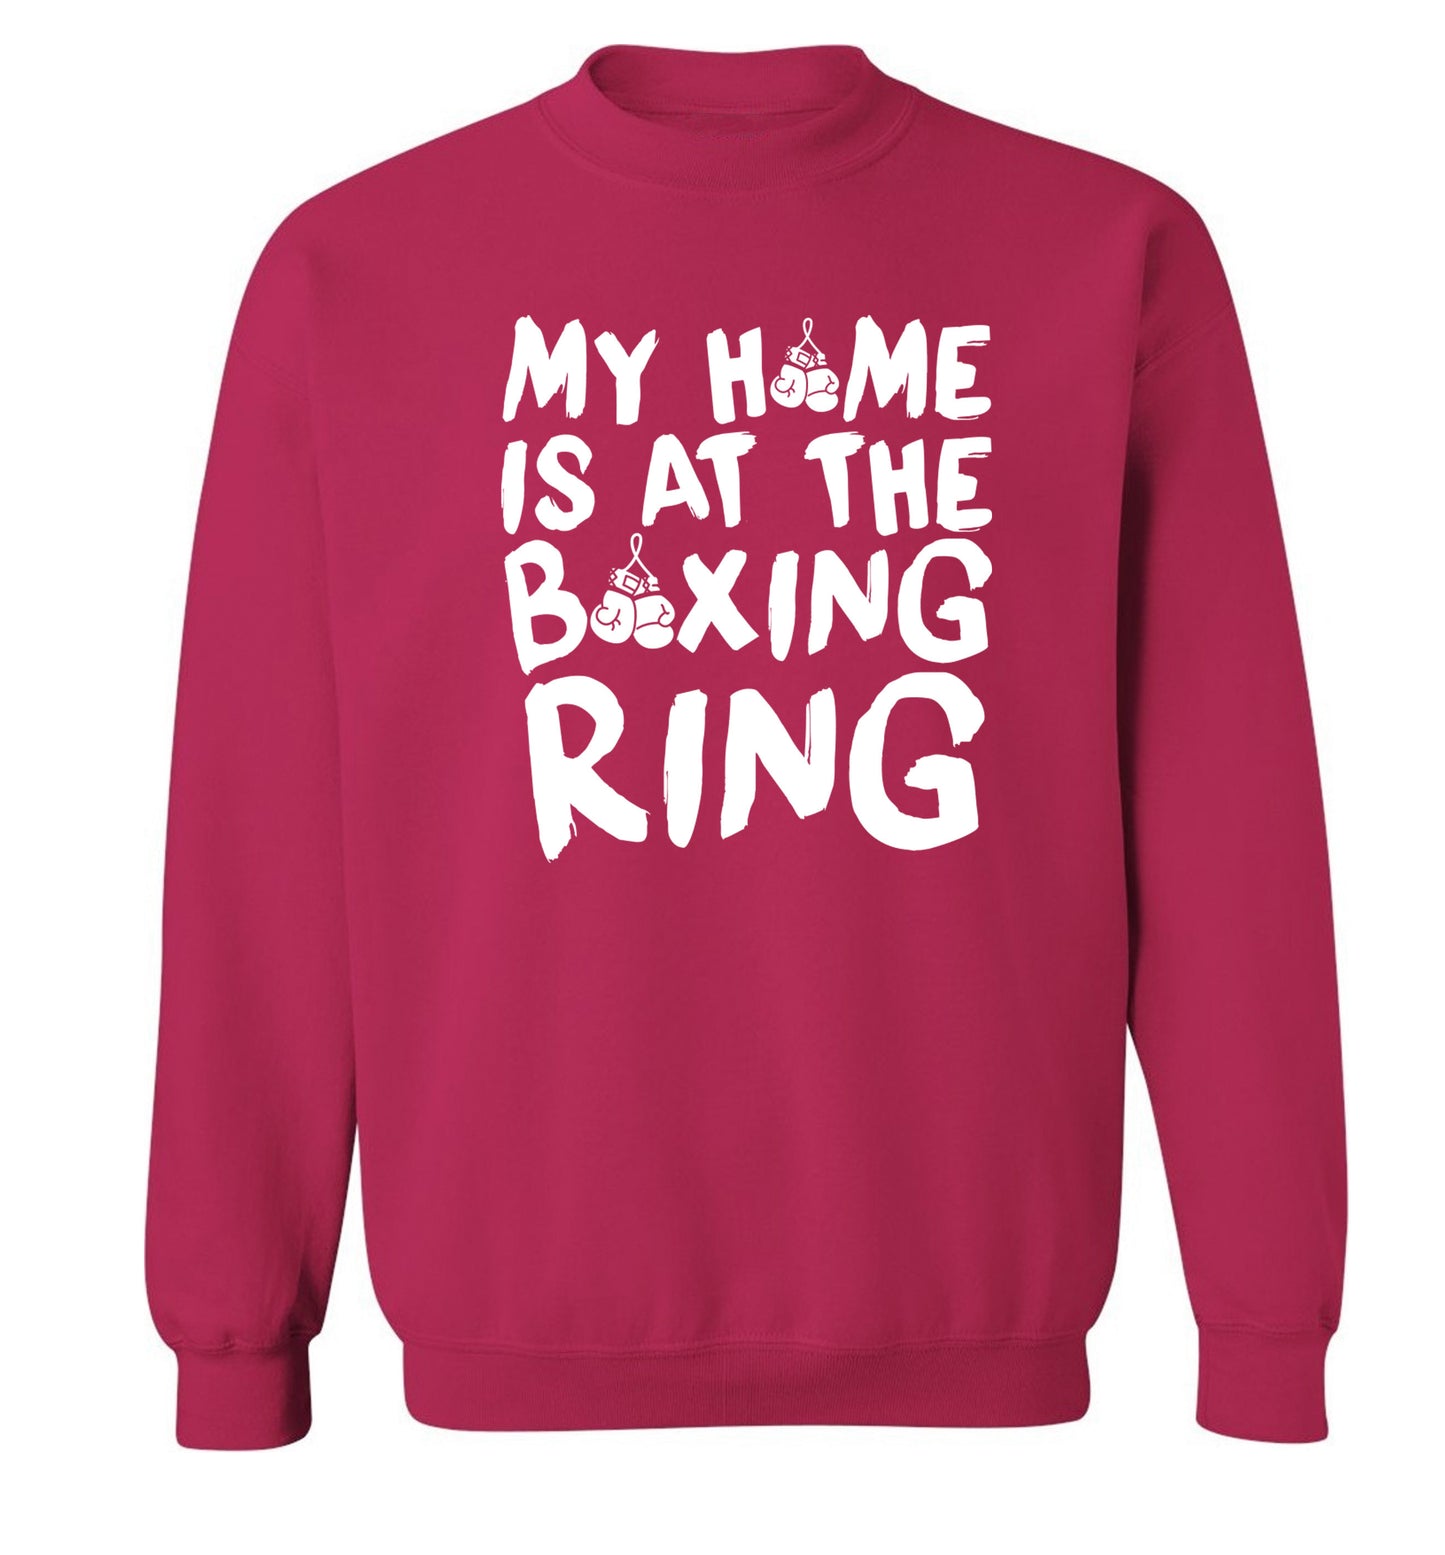 My home is at the boxing ring Adult's unisex pink Sweater 2XL